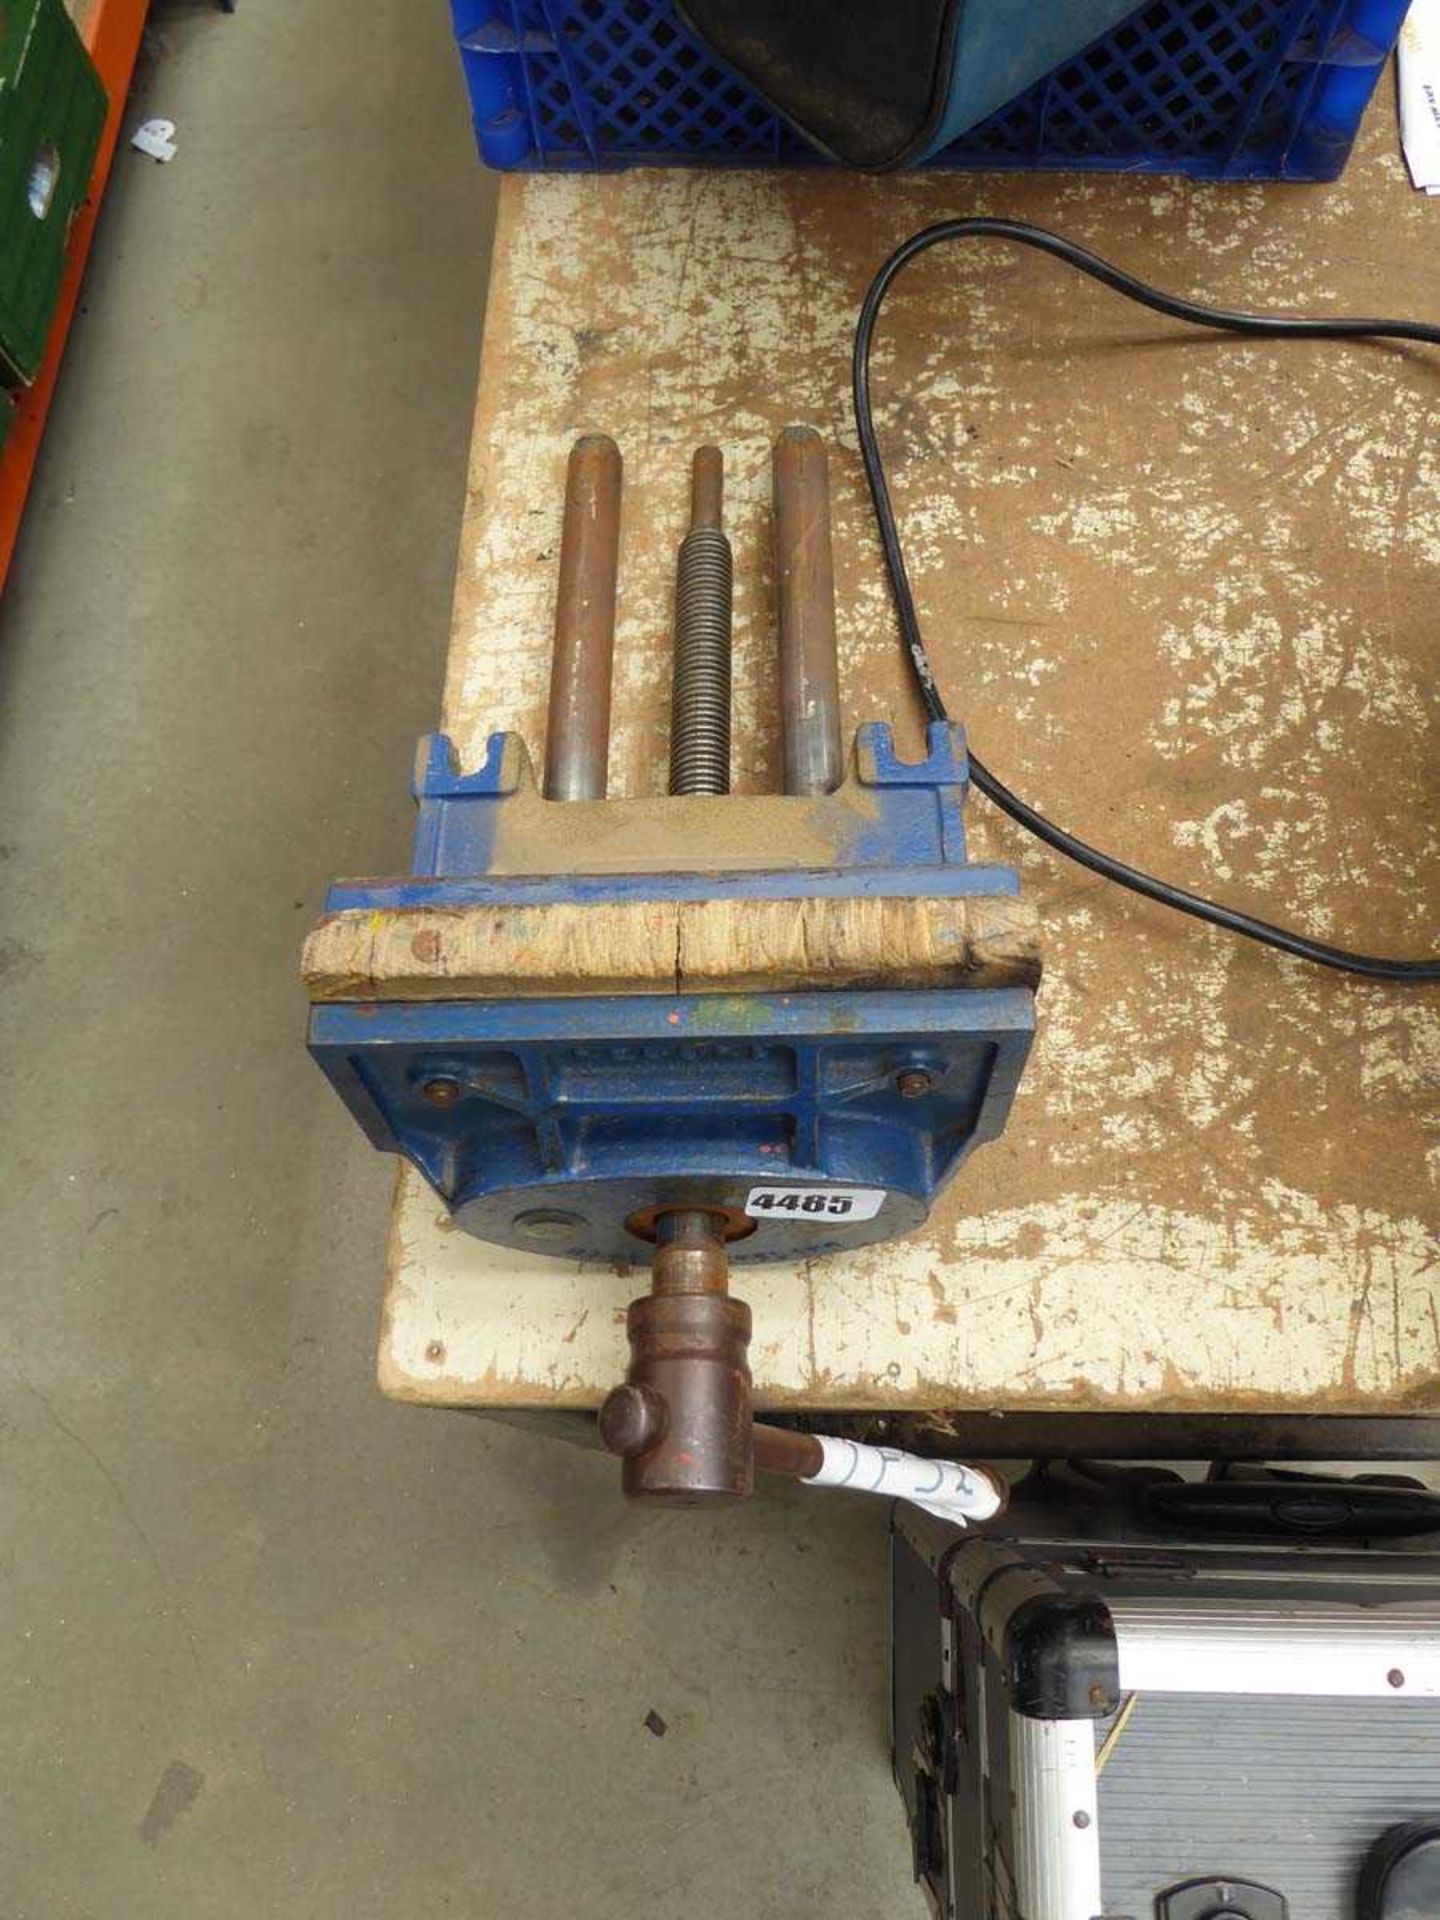 Woodworking vice